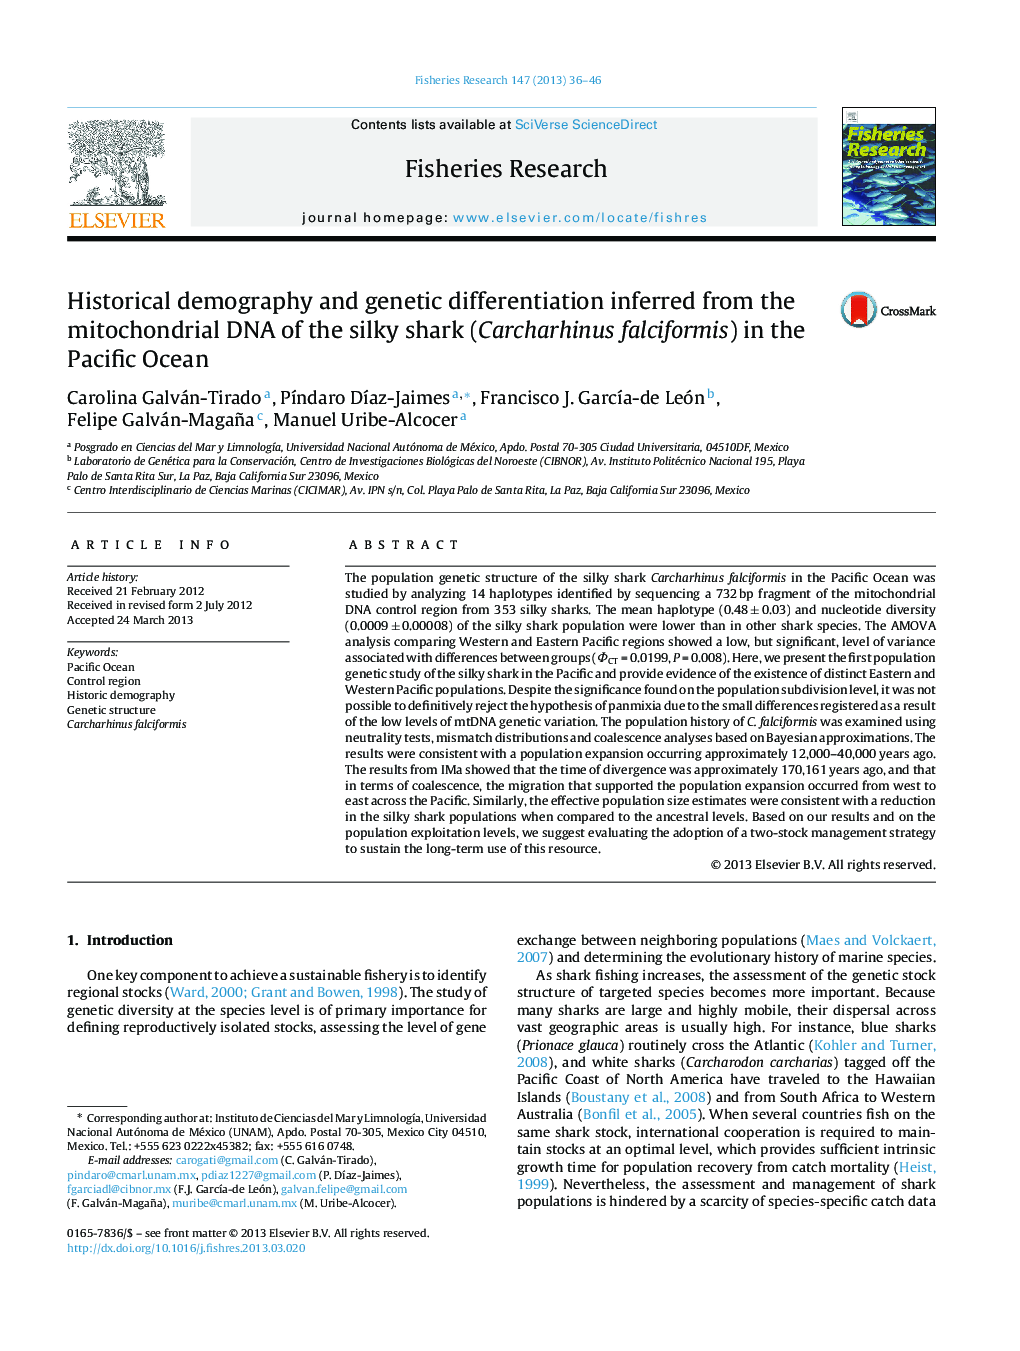 Historical demography and genetic differentiation inferred from the mitochondrial DNA of the silky shark (Carcharhinus falciformis) in the Pacific Ocean